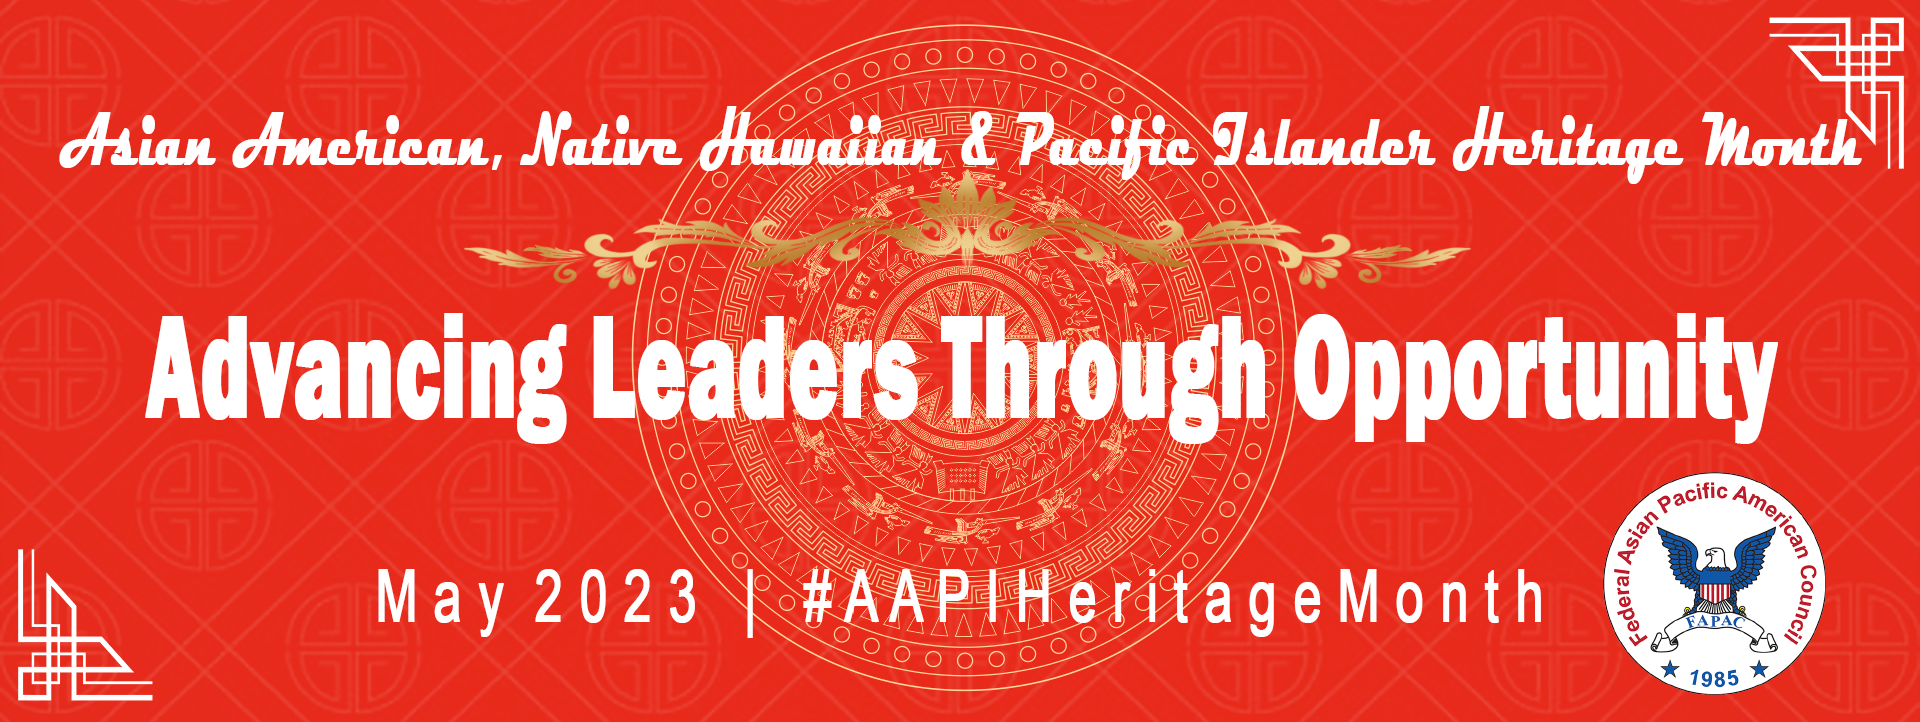 Asian American, Native Hawaiian and Pacific Islander (AANHPI) Heritage Month: Advancing Leaders Through Opportunity May 2023 #AAPIHeritageMonth